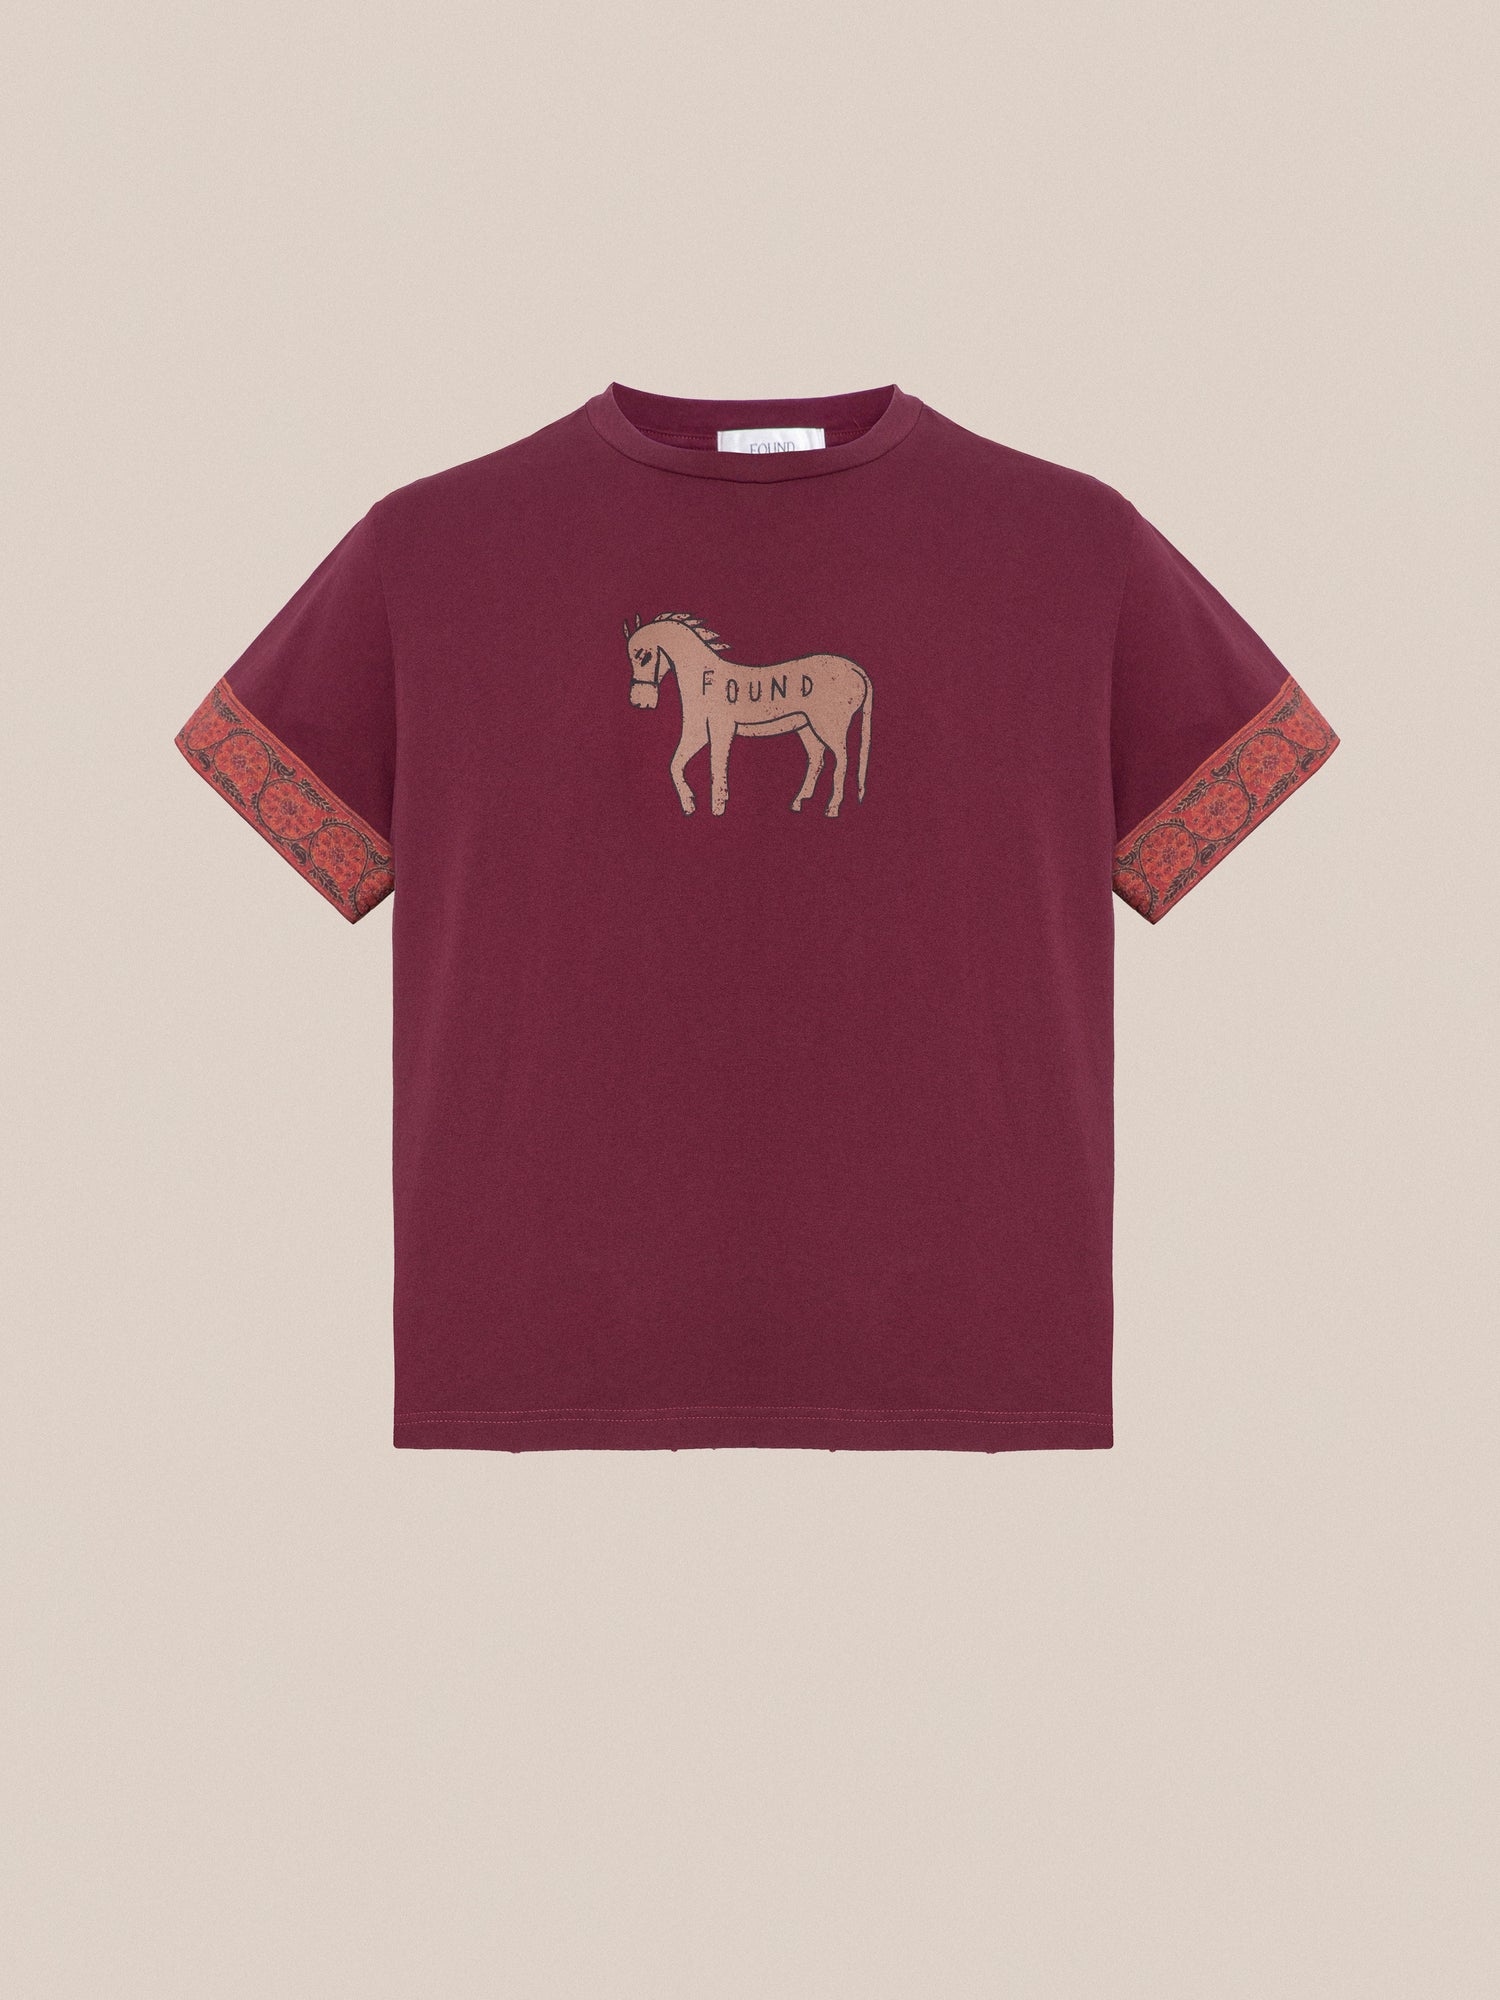 A burgundy Horse Embellishment Tee with a horse and floral motifs embellishment on it by Found.